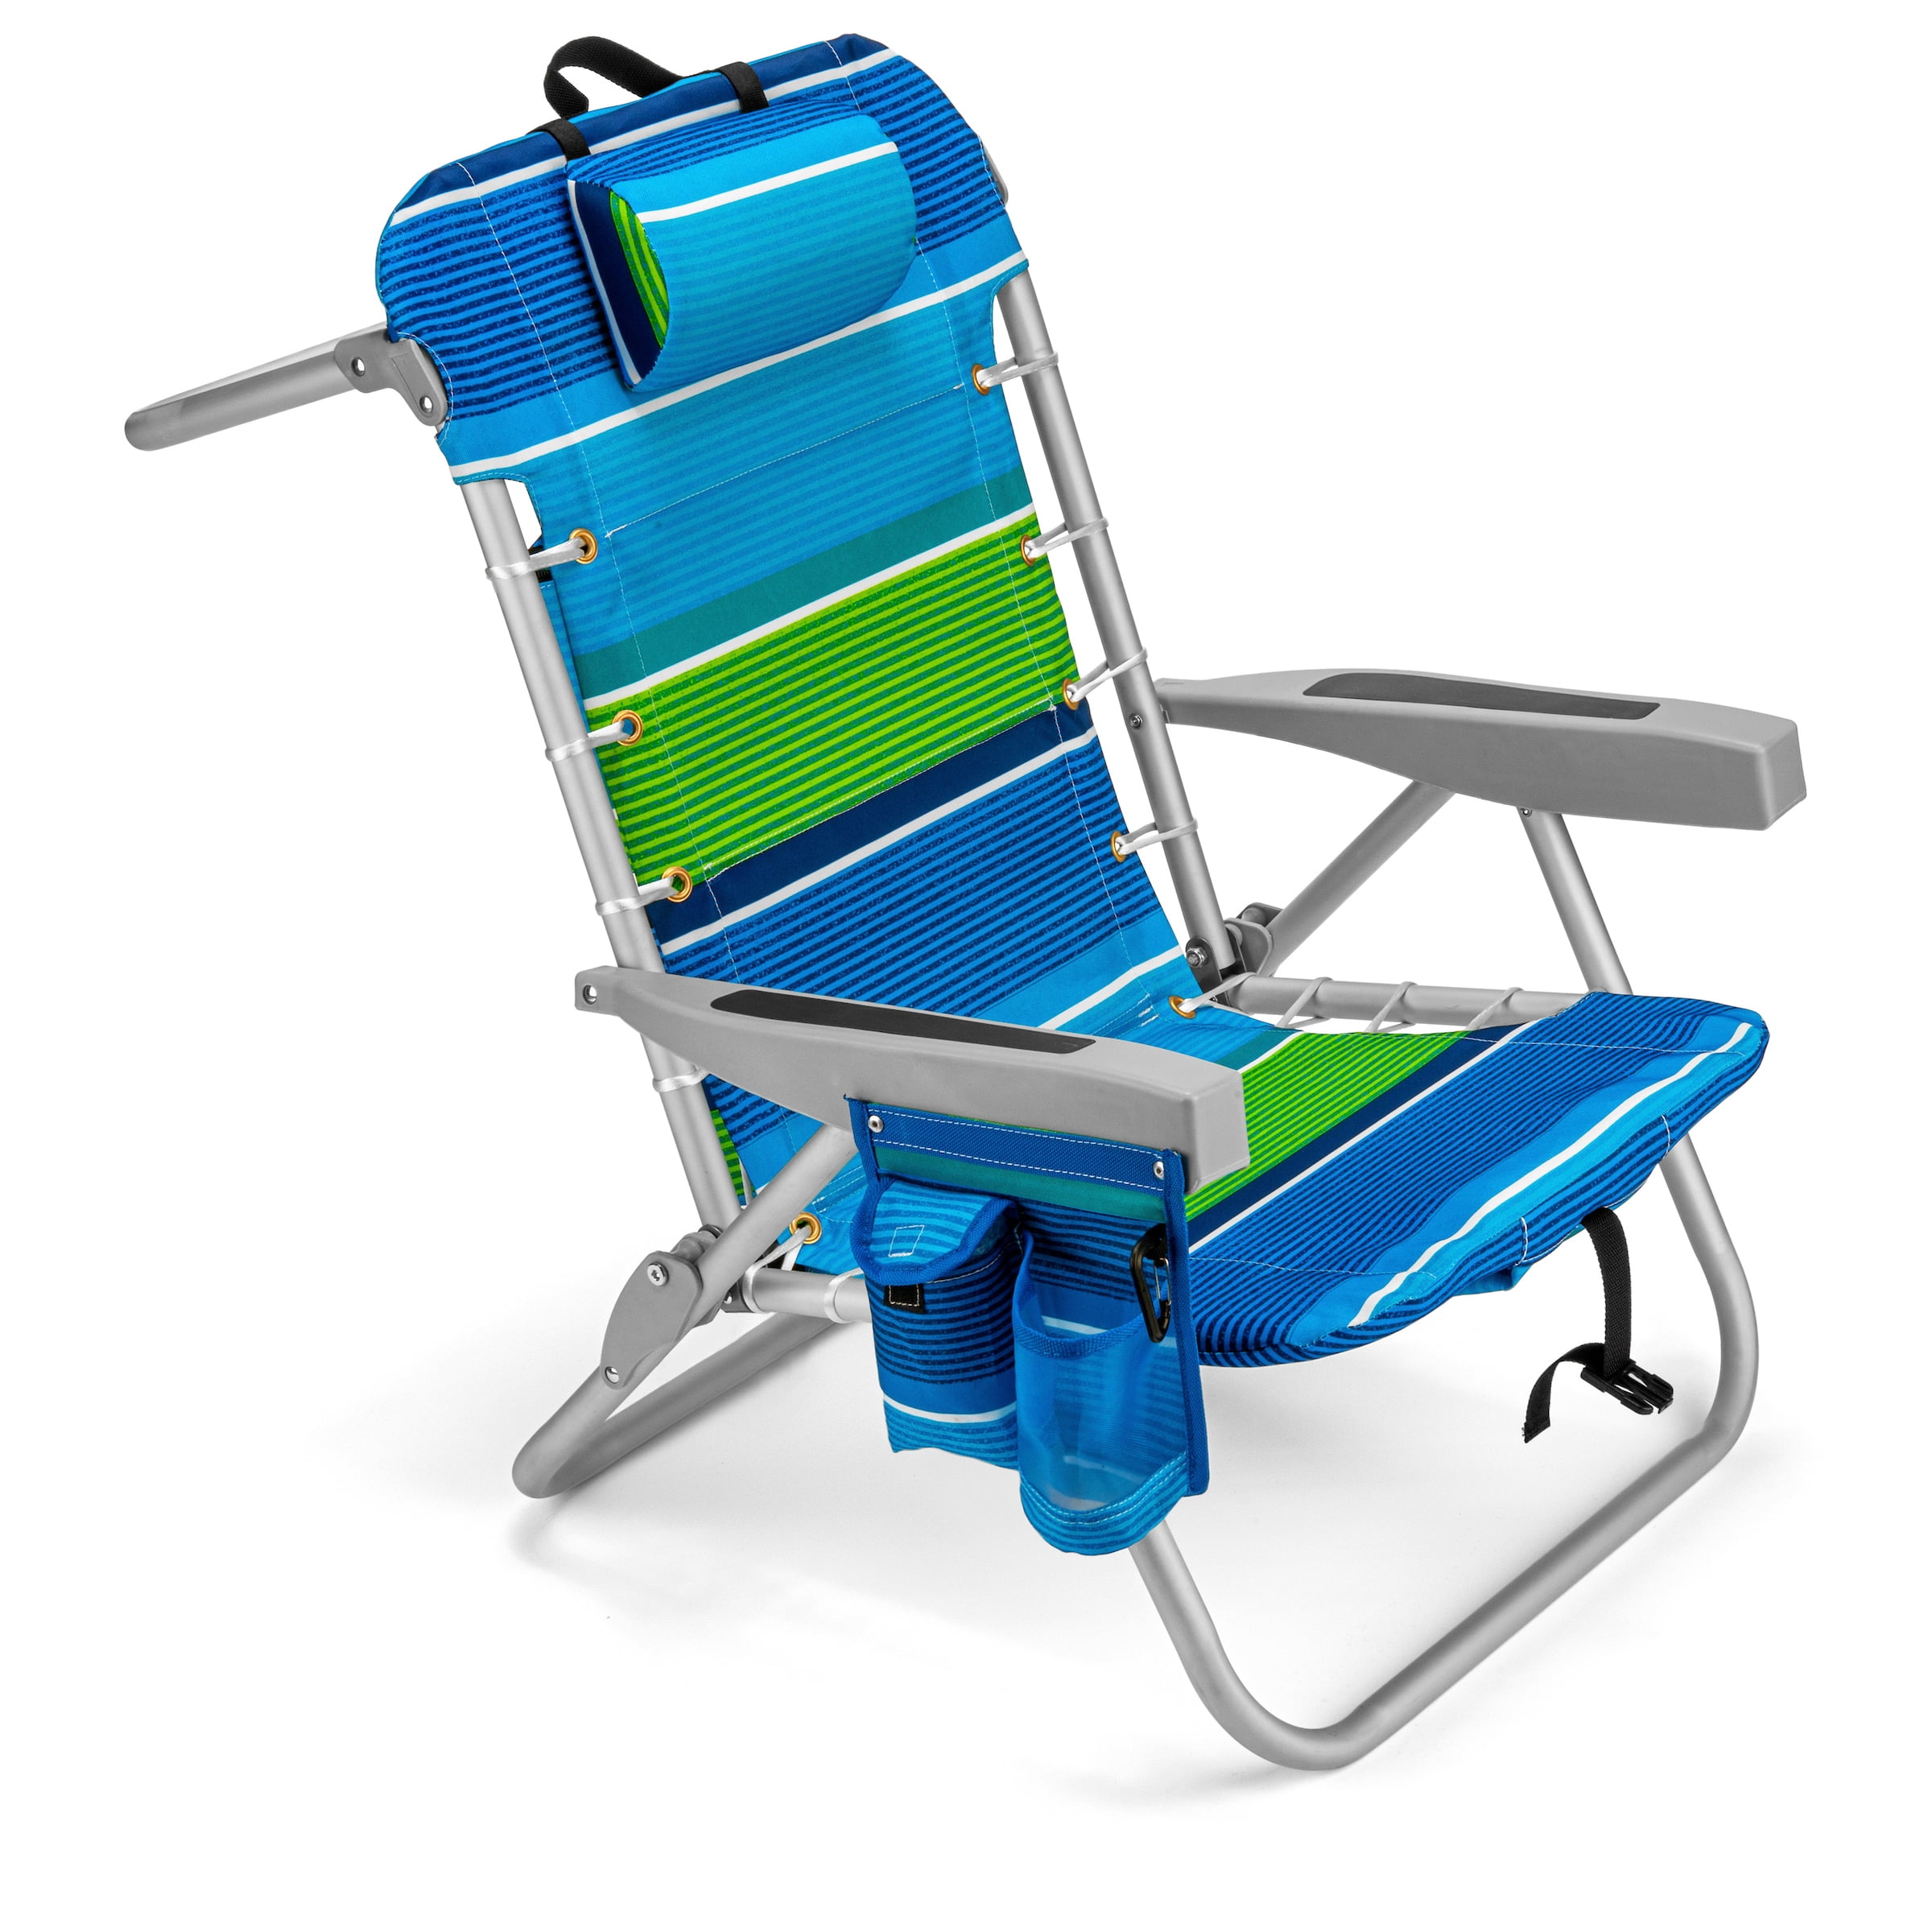 Homevative Folding Backpack Beach Chair with Positions, Towel bar, Blue  Green